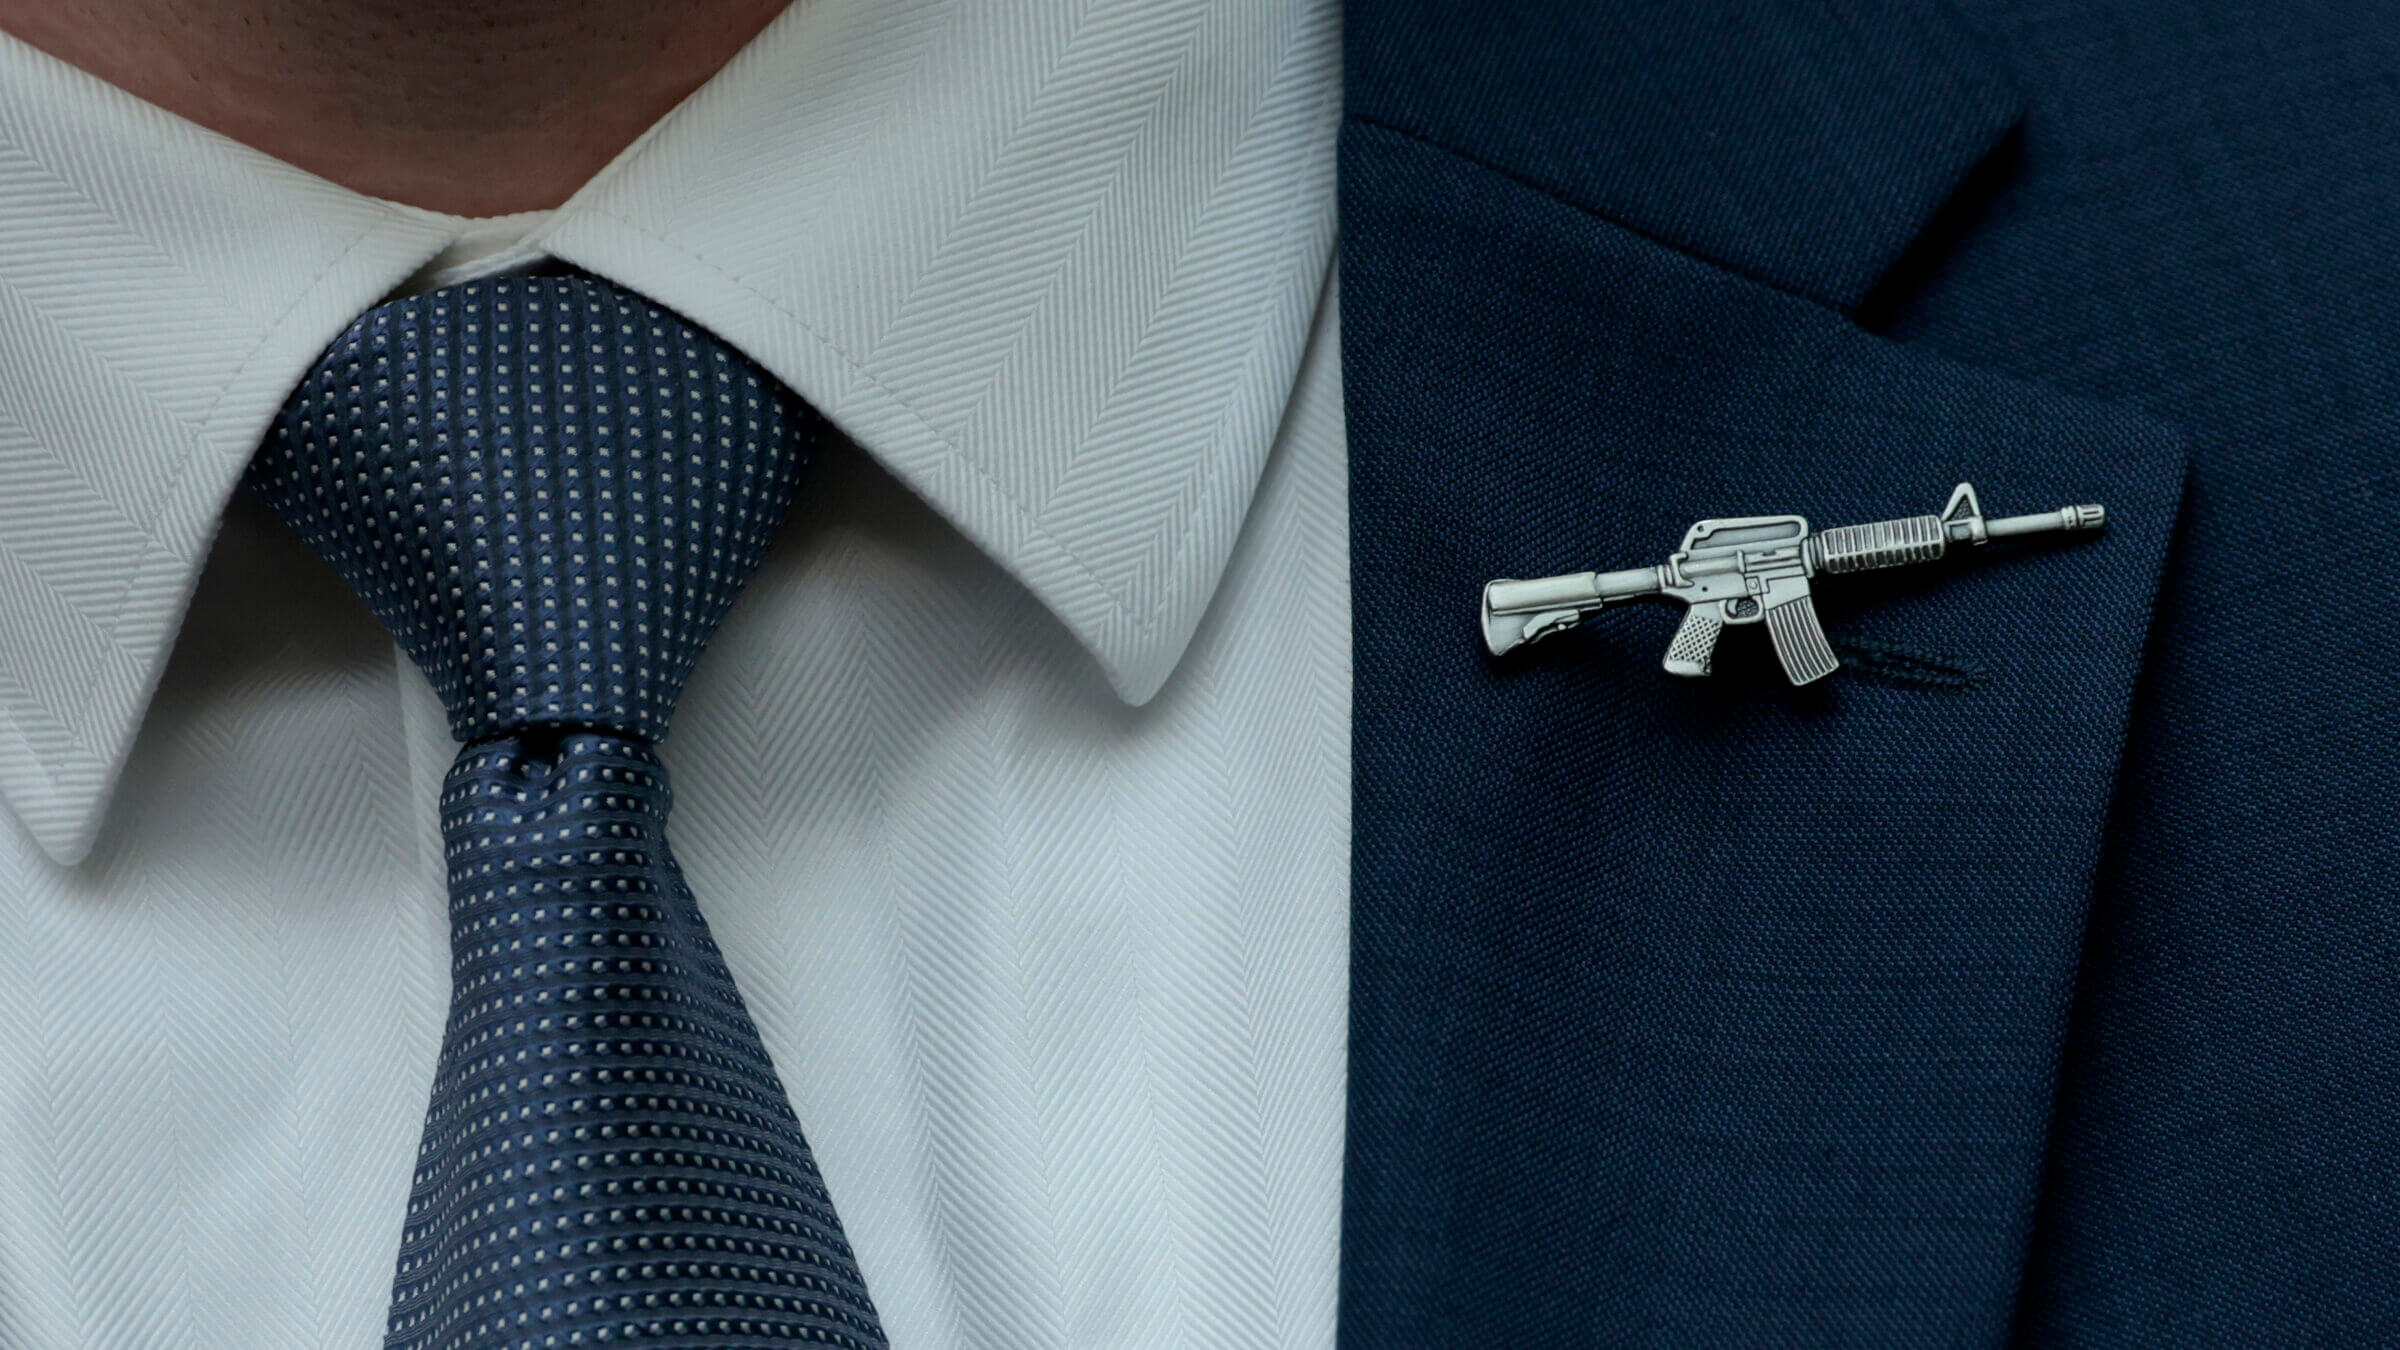 A congressional staffer wears a rifle-shaped pin on his suit during a House Judiciary Committee markup hearing in the Rayburn House Office Building on June 2, 2022, in Washington, D.C.